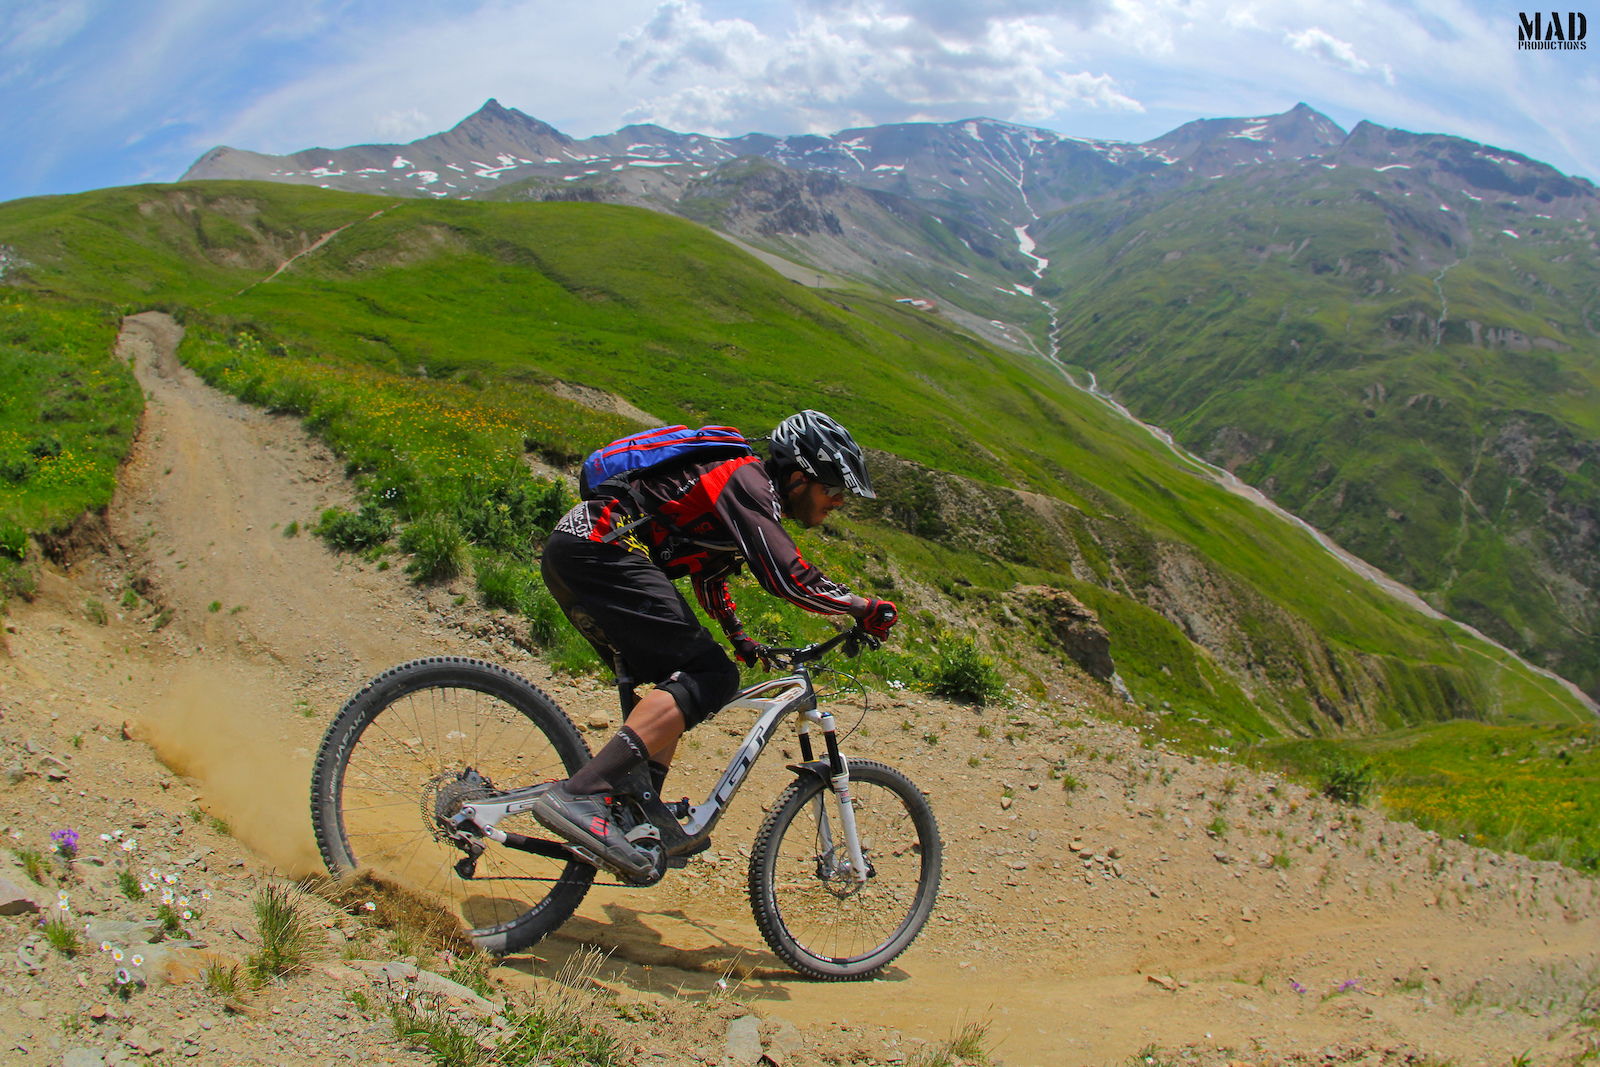 "Remember that time we went to Livigno with Monkeymtb ?!" - how can I forget bro ? MADproductions rider, Rui Sousa, riding Carosello 3000 Ski Area Livigno super fun singletrack !